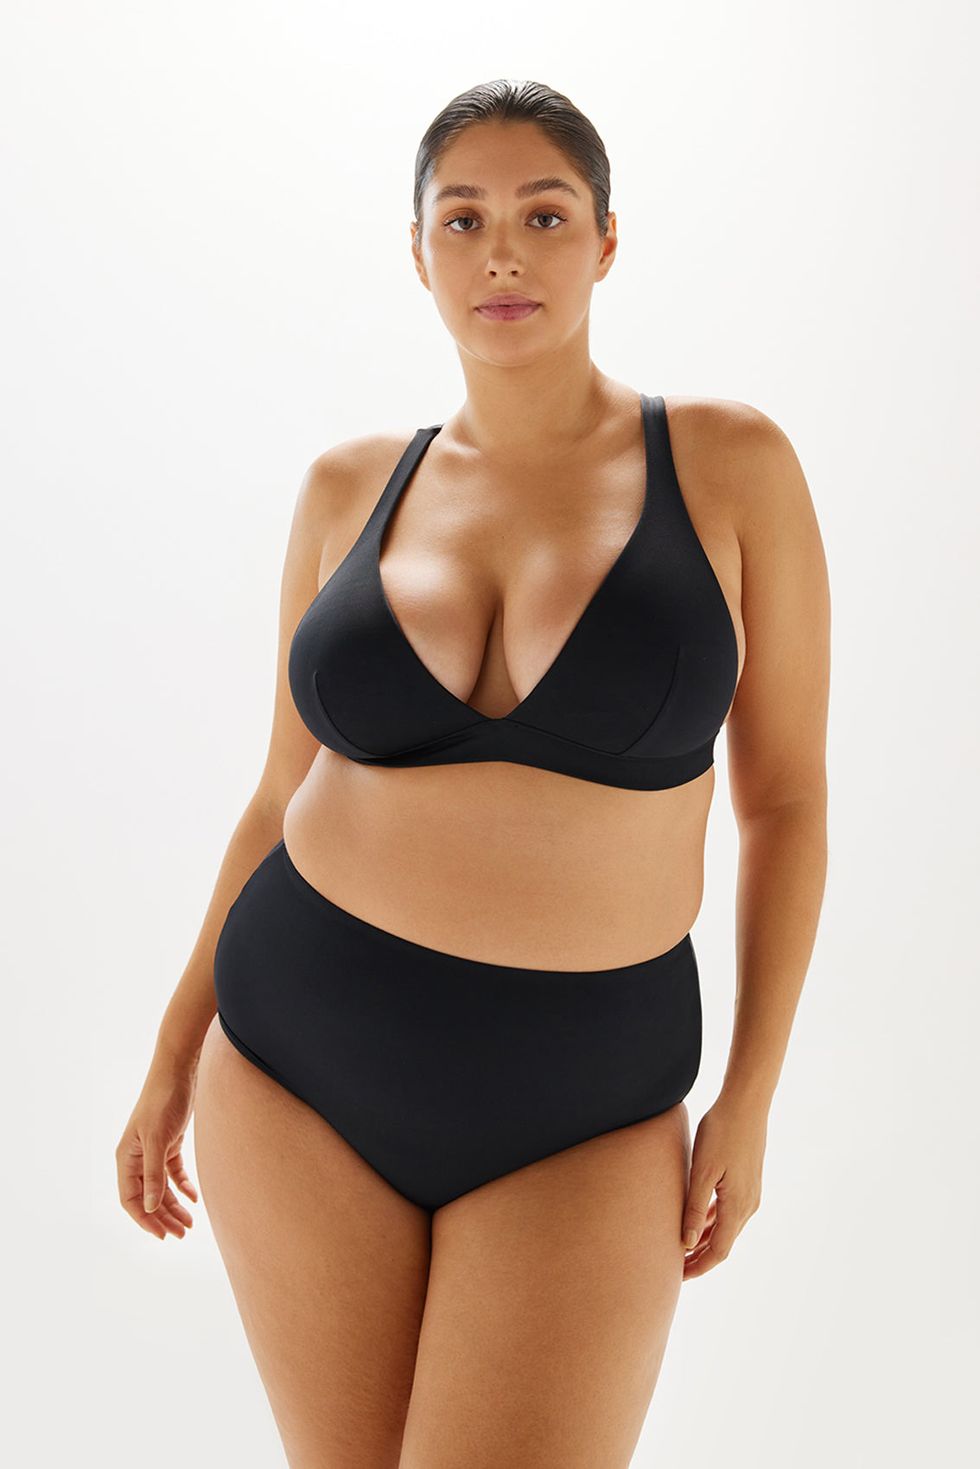 20 Plus Size Swimsuits To Shop - The Fat Girls Guide 20 Plus Size